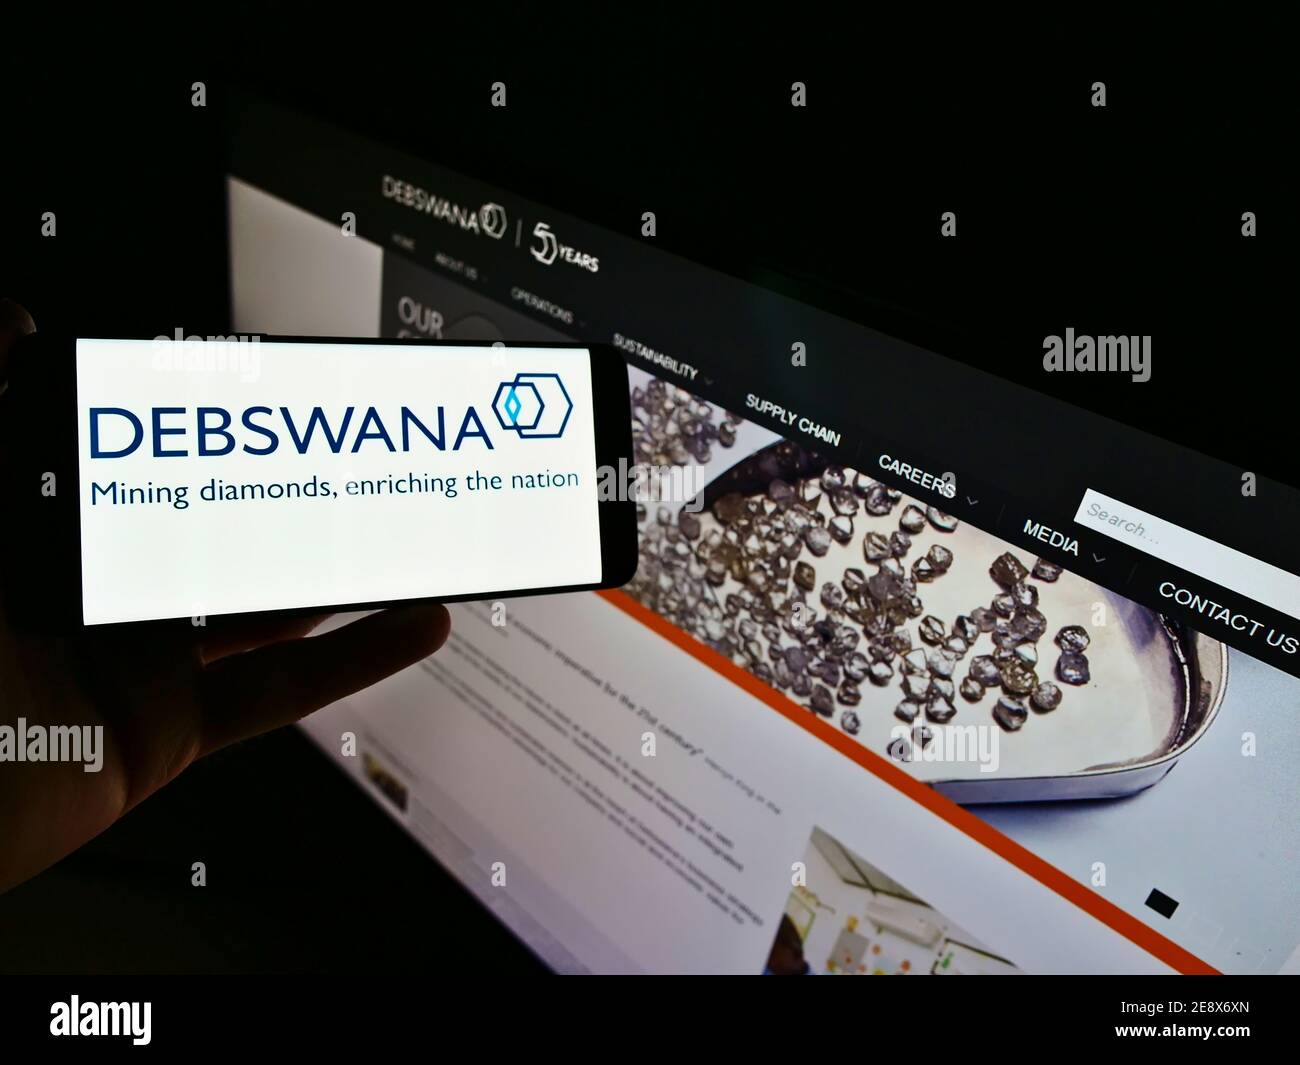 Person holding cellphone with logo of mining company Debswana Diamond Company Limited on display in front of business website. Focus on phone screen. Stock Photo